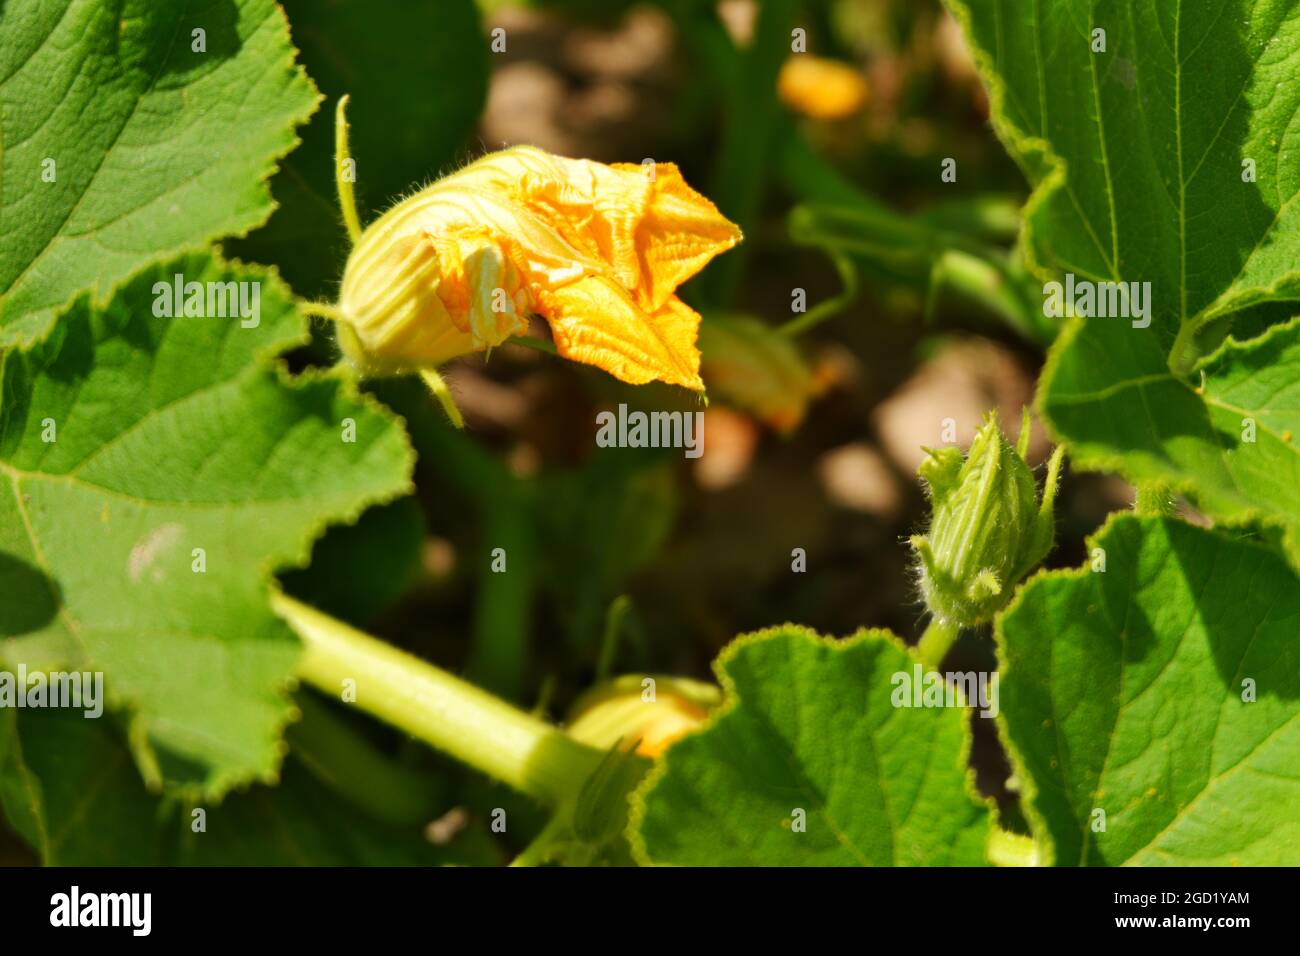 Zucchini Blossoms Within Green Leaves Summertime Stock Photo